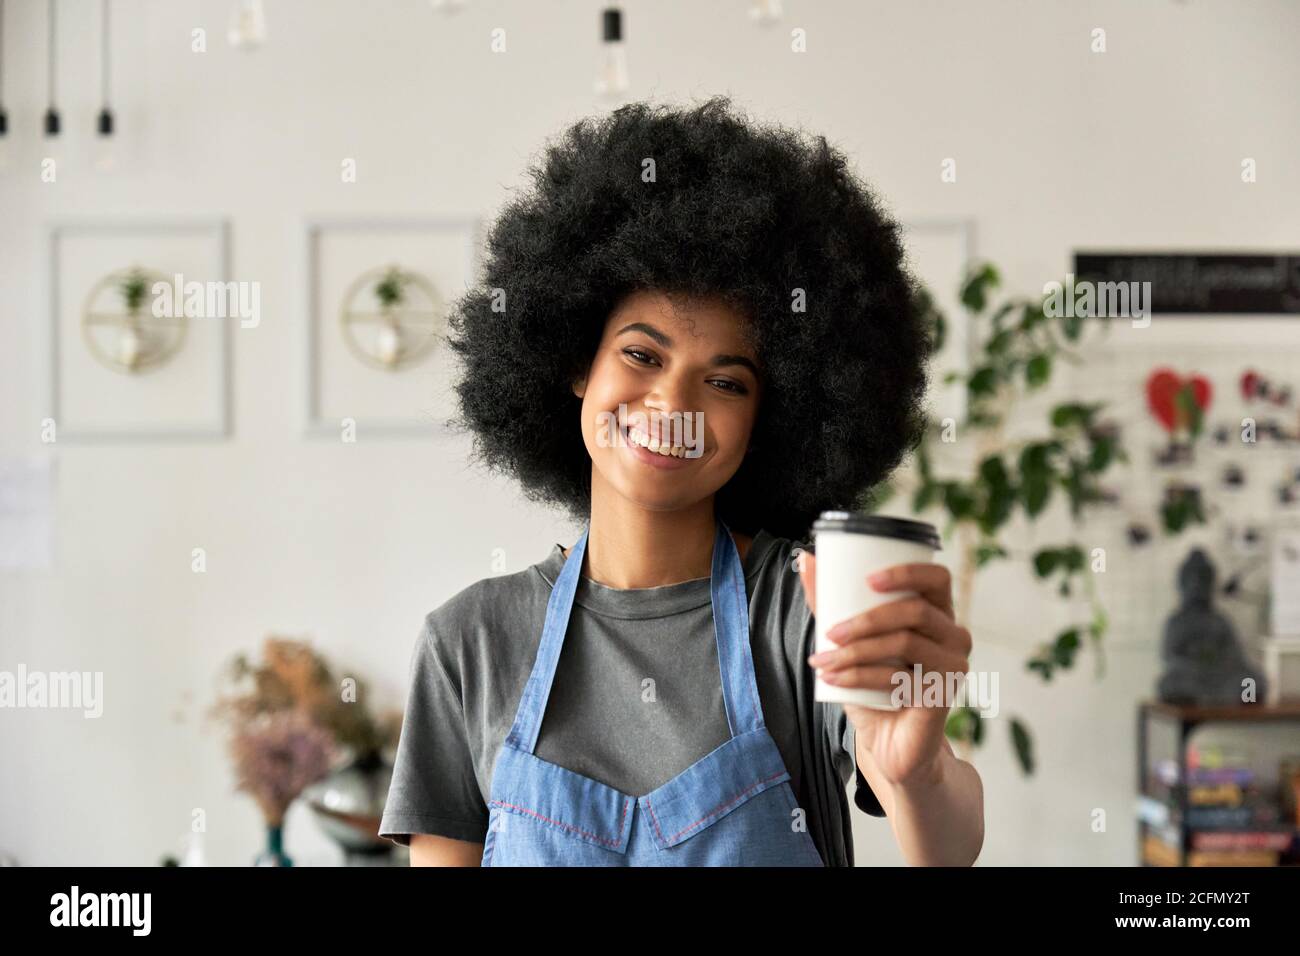 Happy African young woman cafe employee holding coffee cup, portrait. Stock Photo